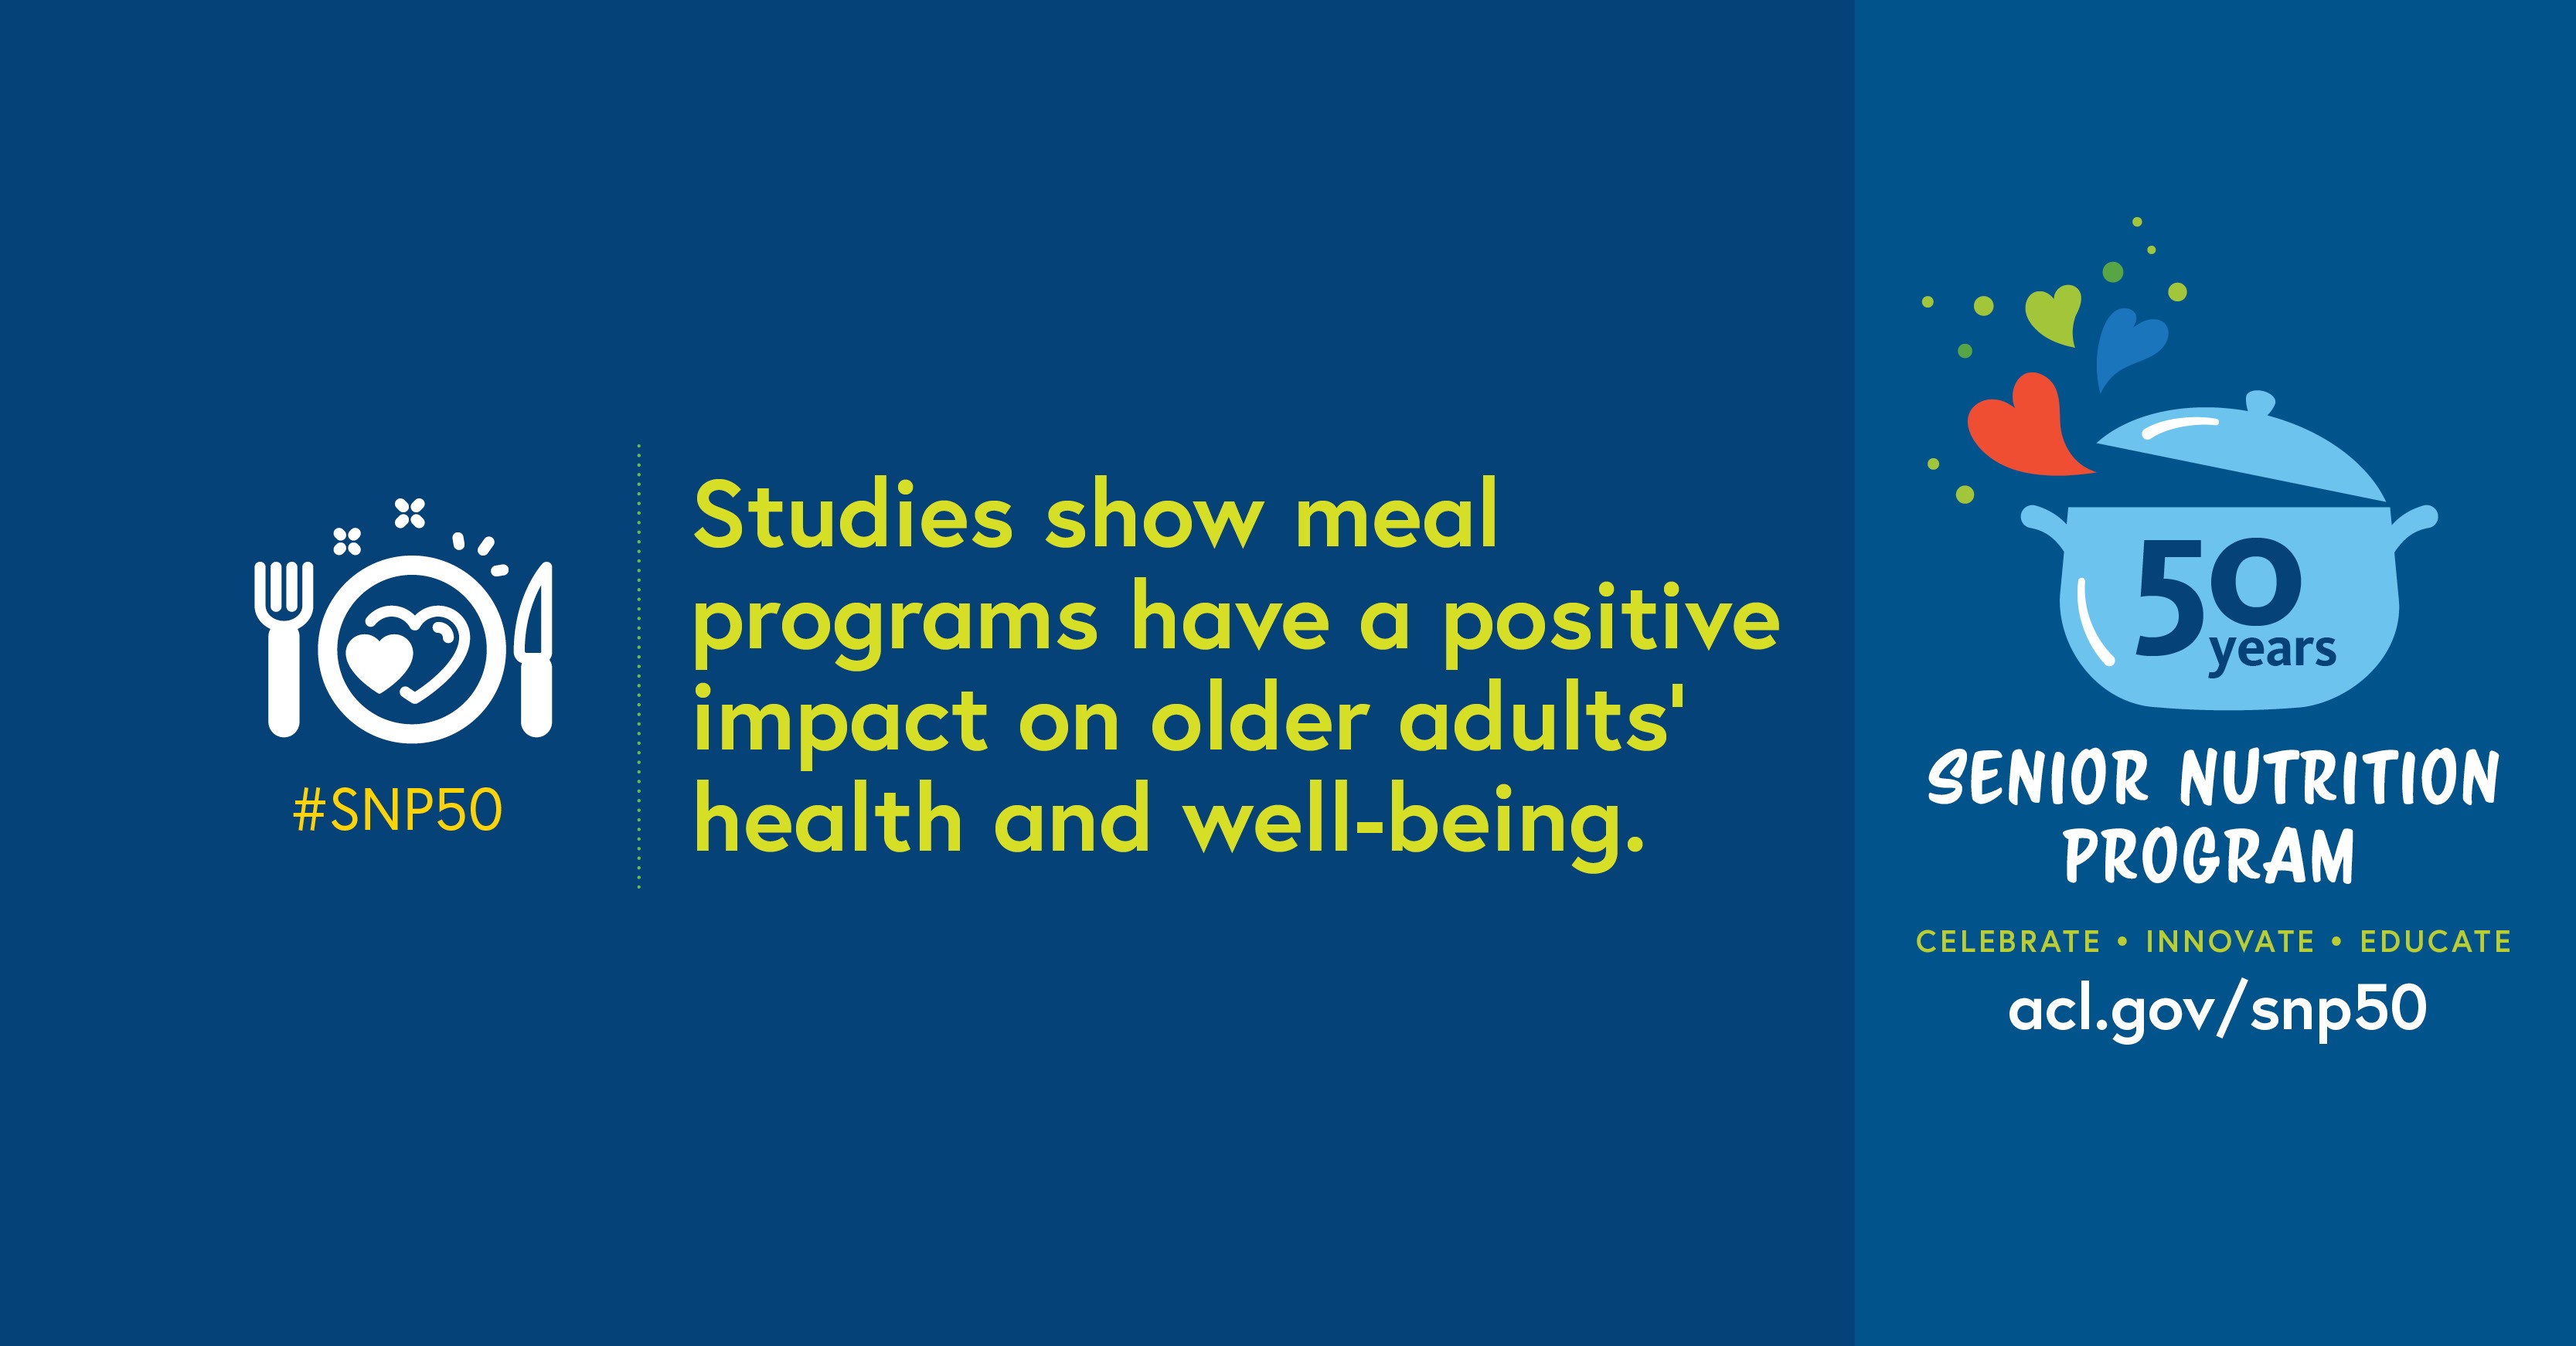 Social Media Graphic: Studies show meal programs have a positive impact on older adults' health and well-being. 50 years. Senior Nutrition Program. Celebrate. Innovate. Educate. acl.gov/snp50 #snp50